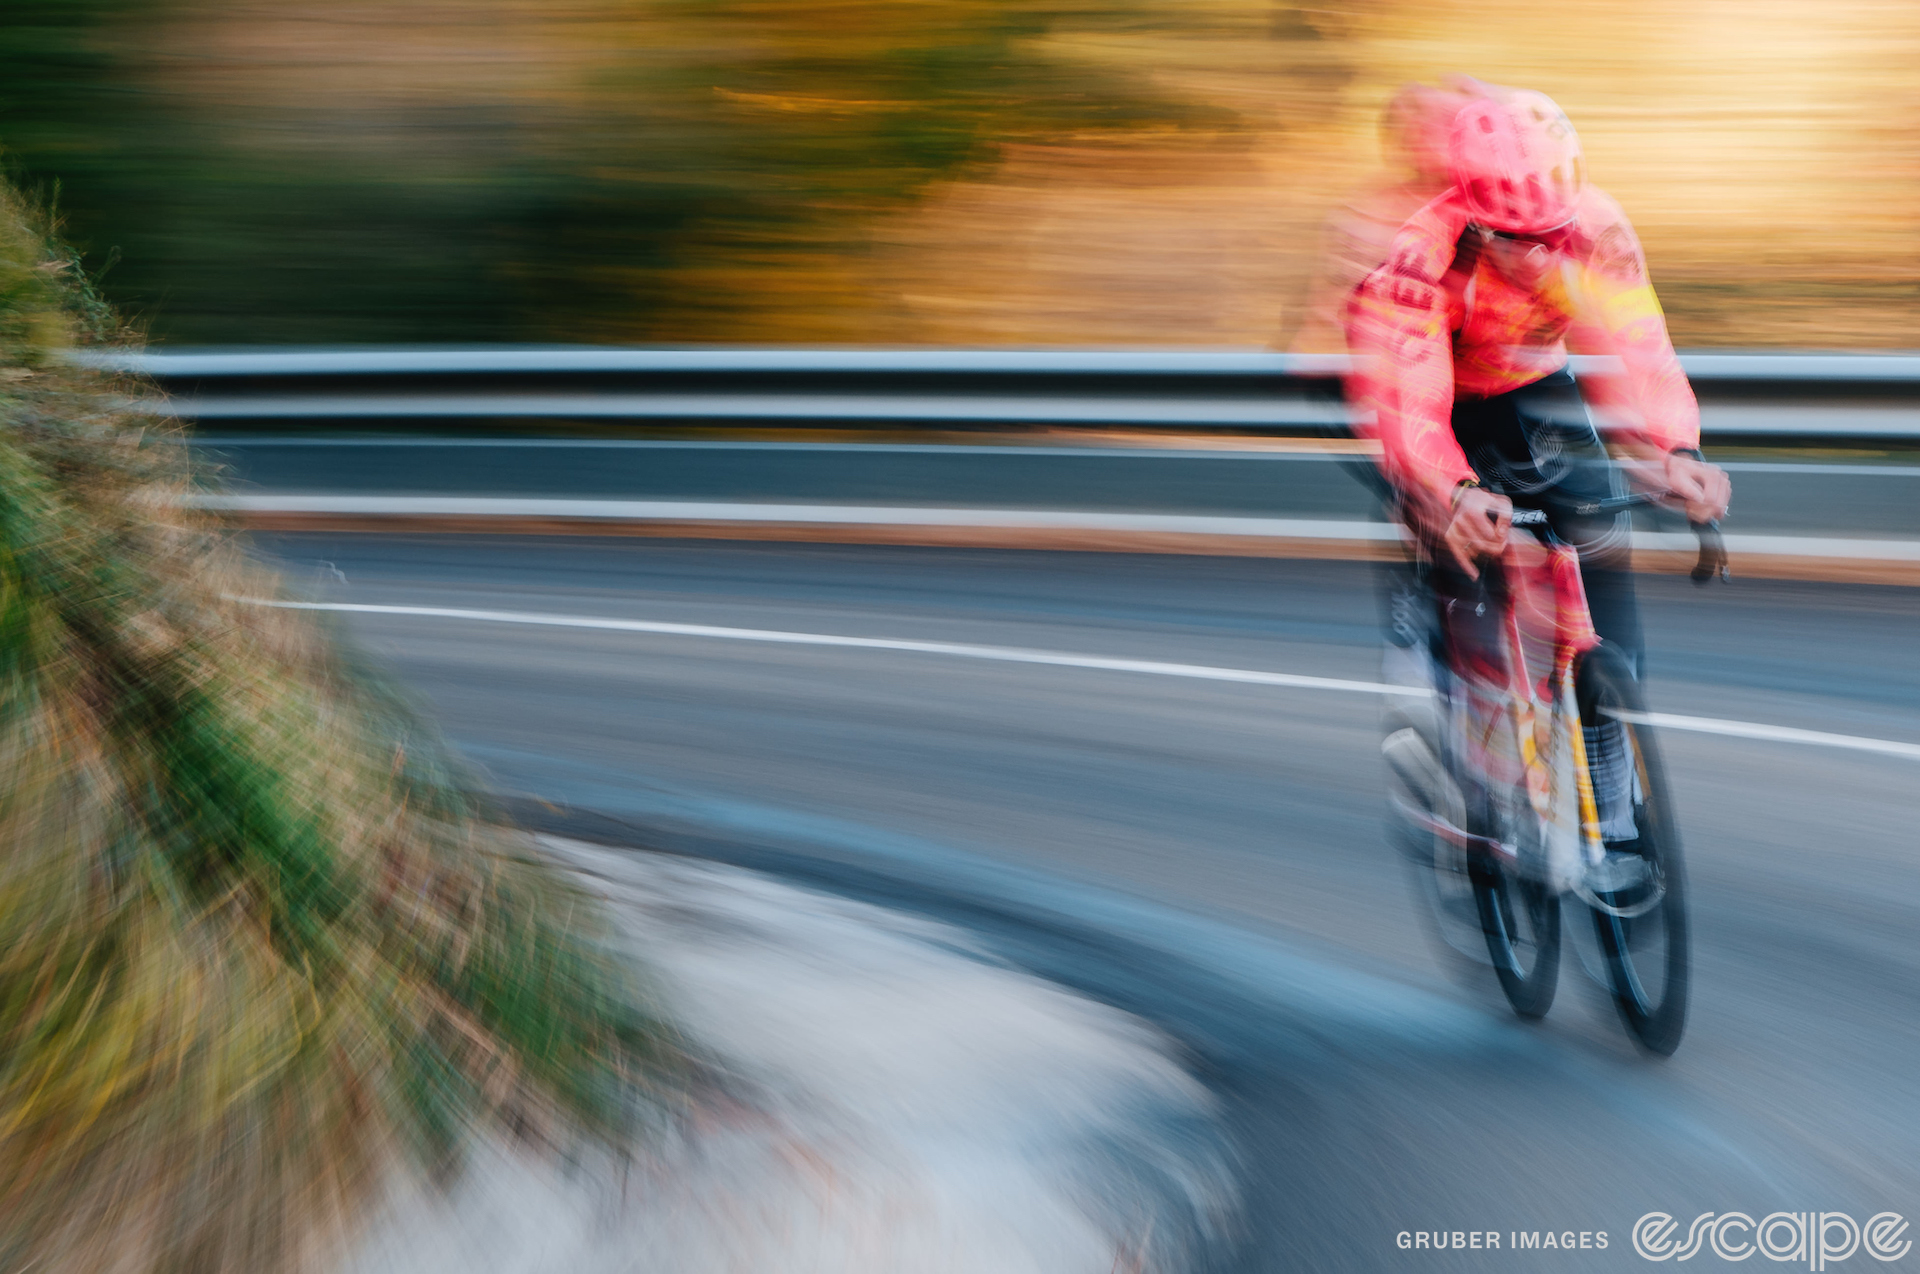 An EF cyclist accelerates around a corner. He's alone, and the shot has a speed blur that results in a kind of double-exposure.